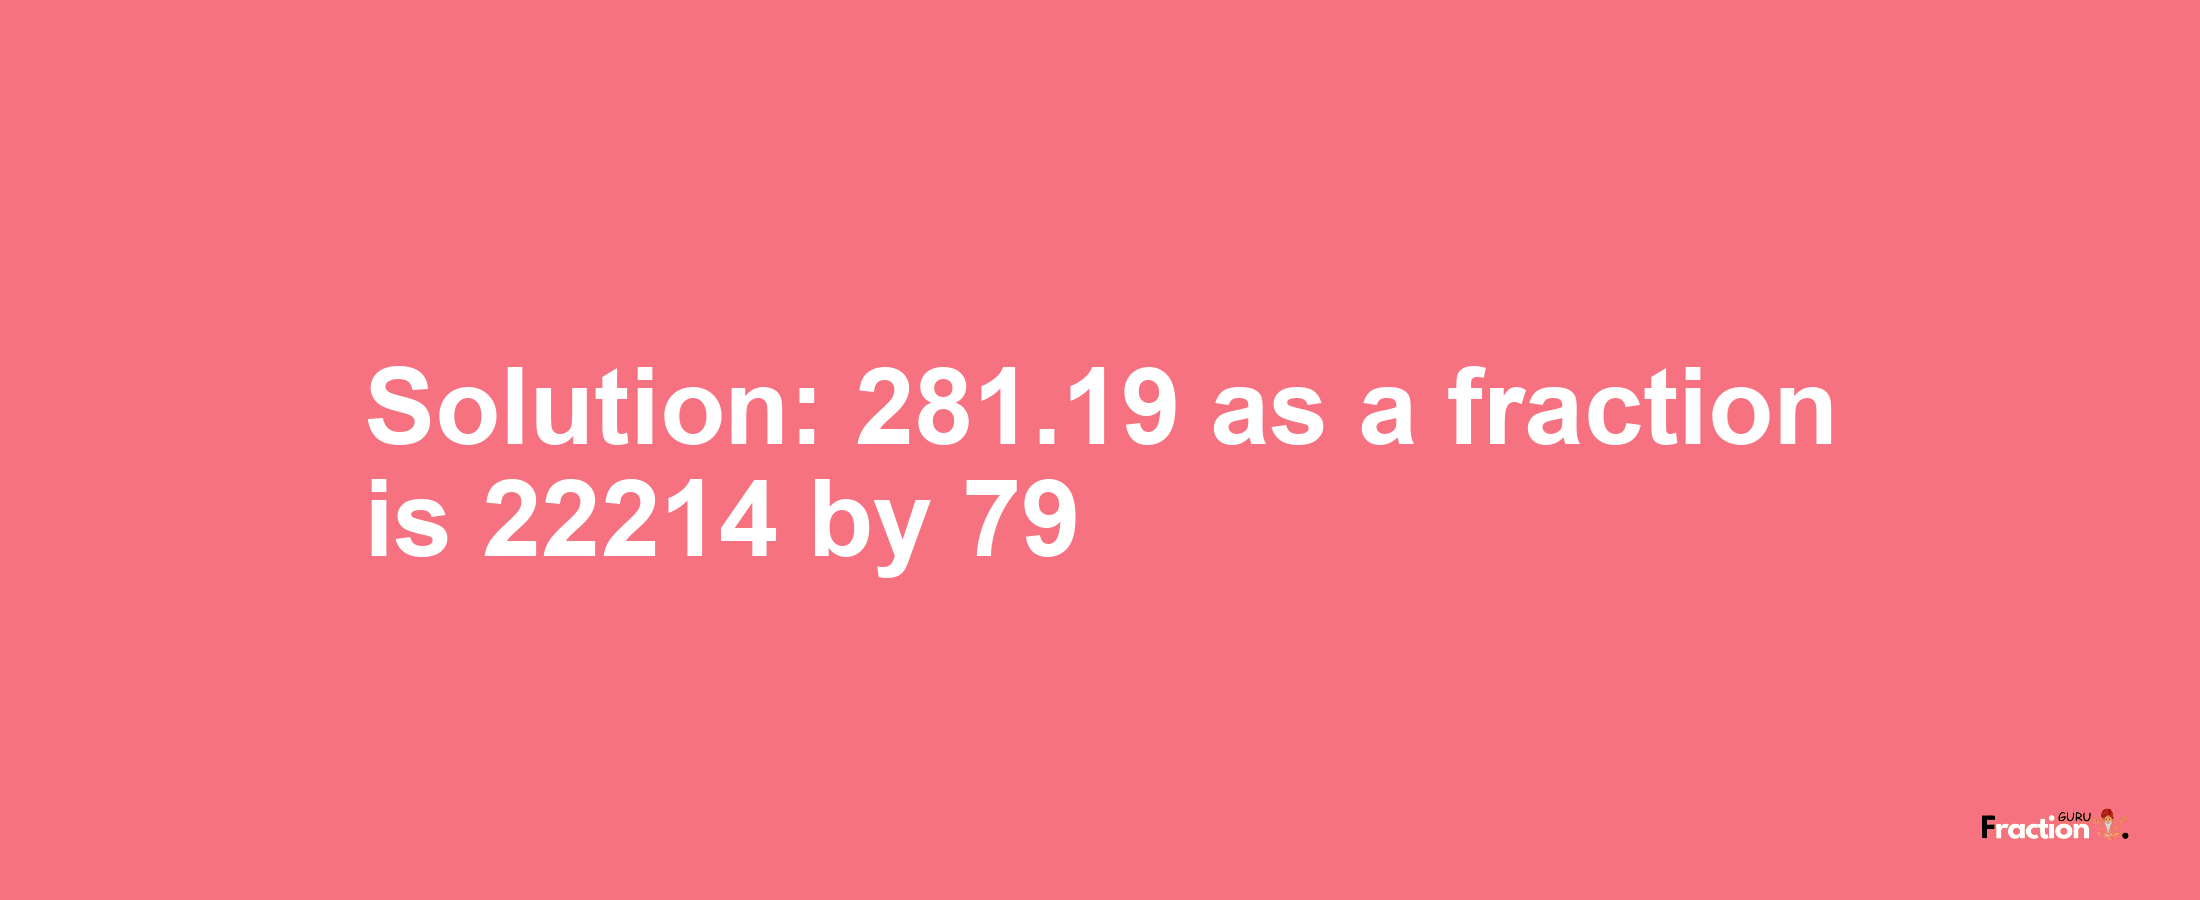 Solution:281.19 as a fraction is 22214/79